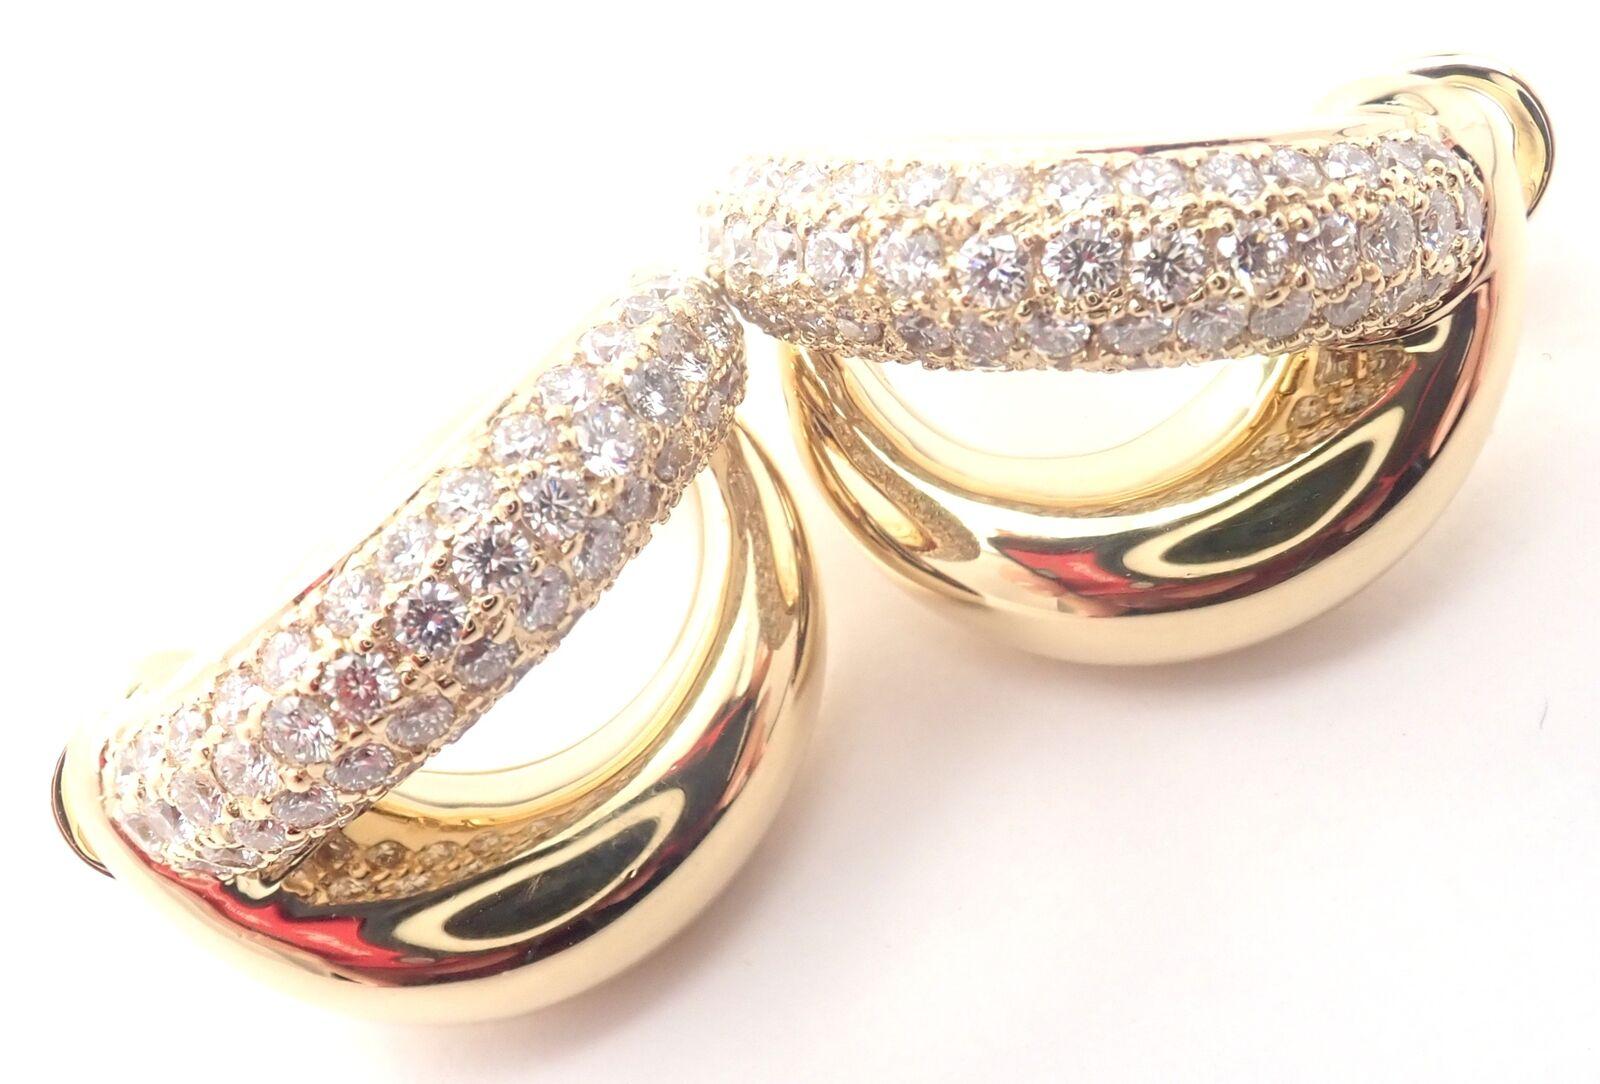 18k Yellow Gold Diamond Double Hoop Earrings by Mauboussin Paris. 
With Round Brilliant Cut Diamonds VS1 clarity, G color total weight approximately 2.3ct
****These earrings are for pierced ears.
Details:
Measurements: Hoop: 21mm x 15mm
Weight: 29.5